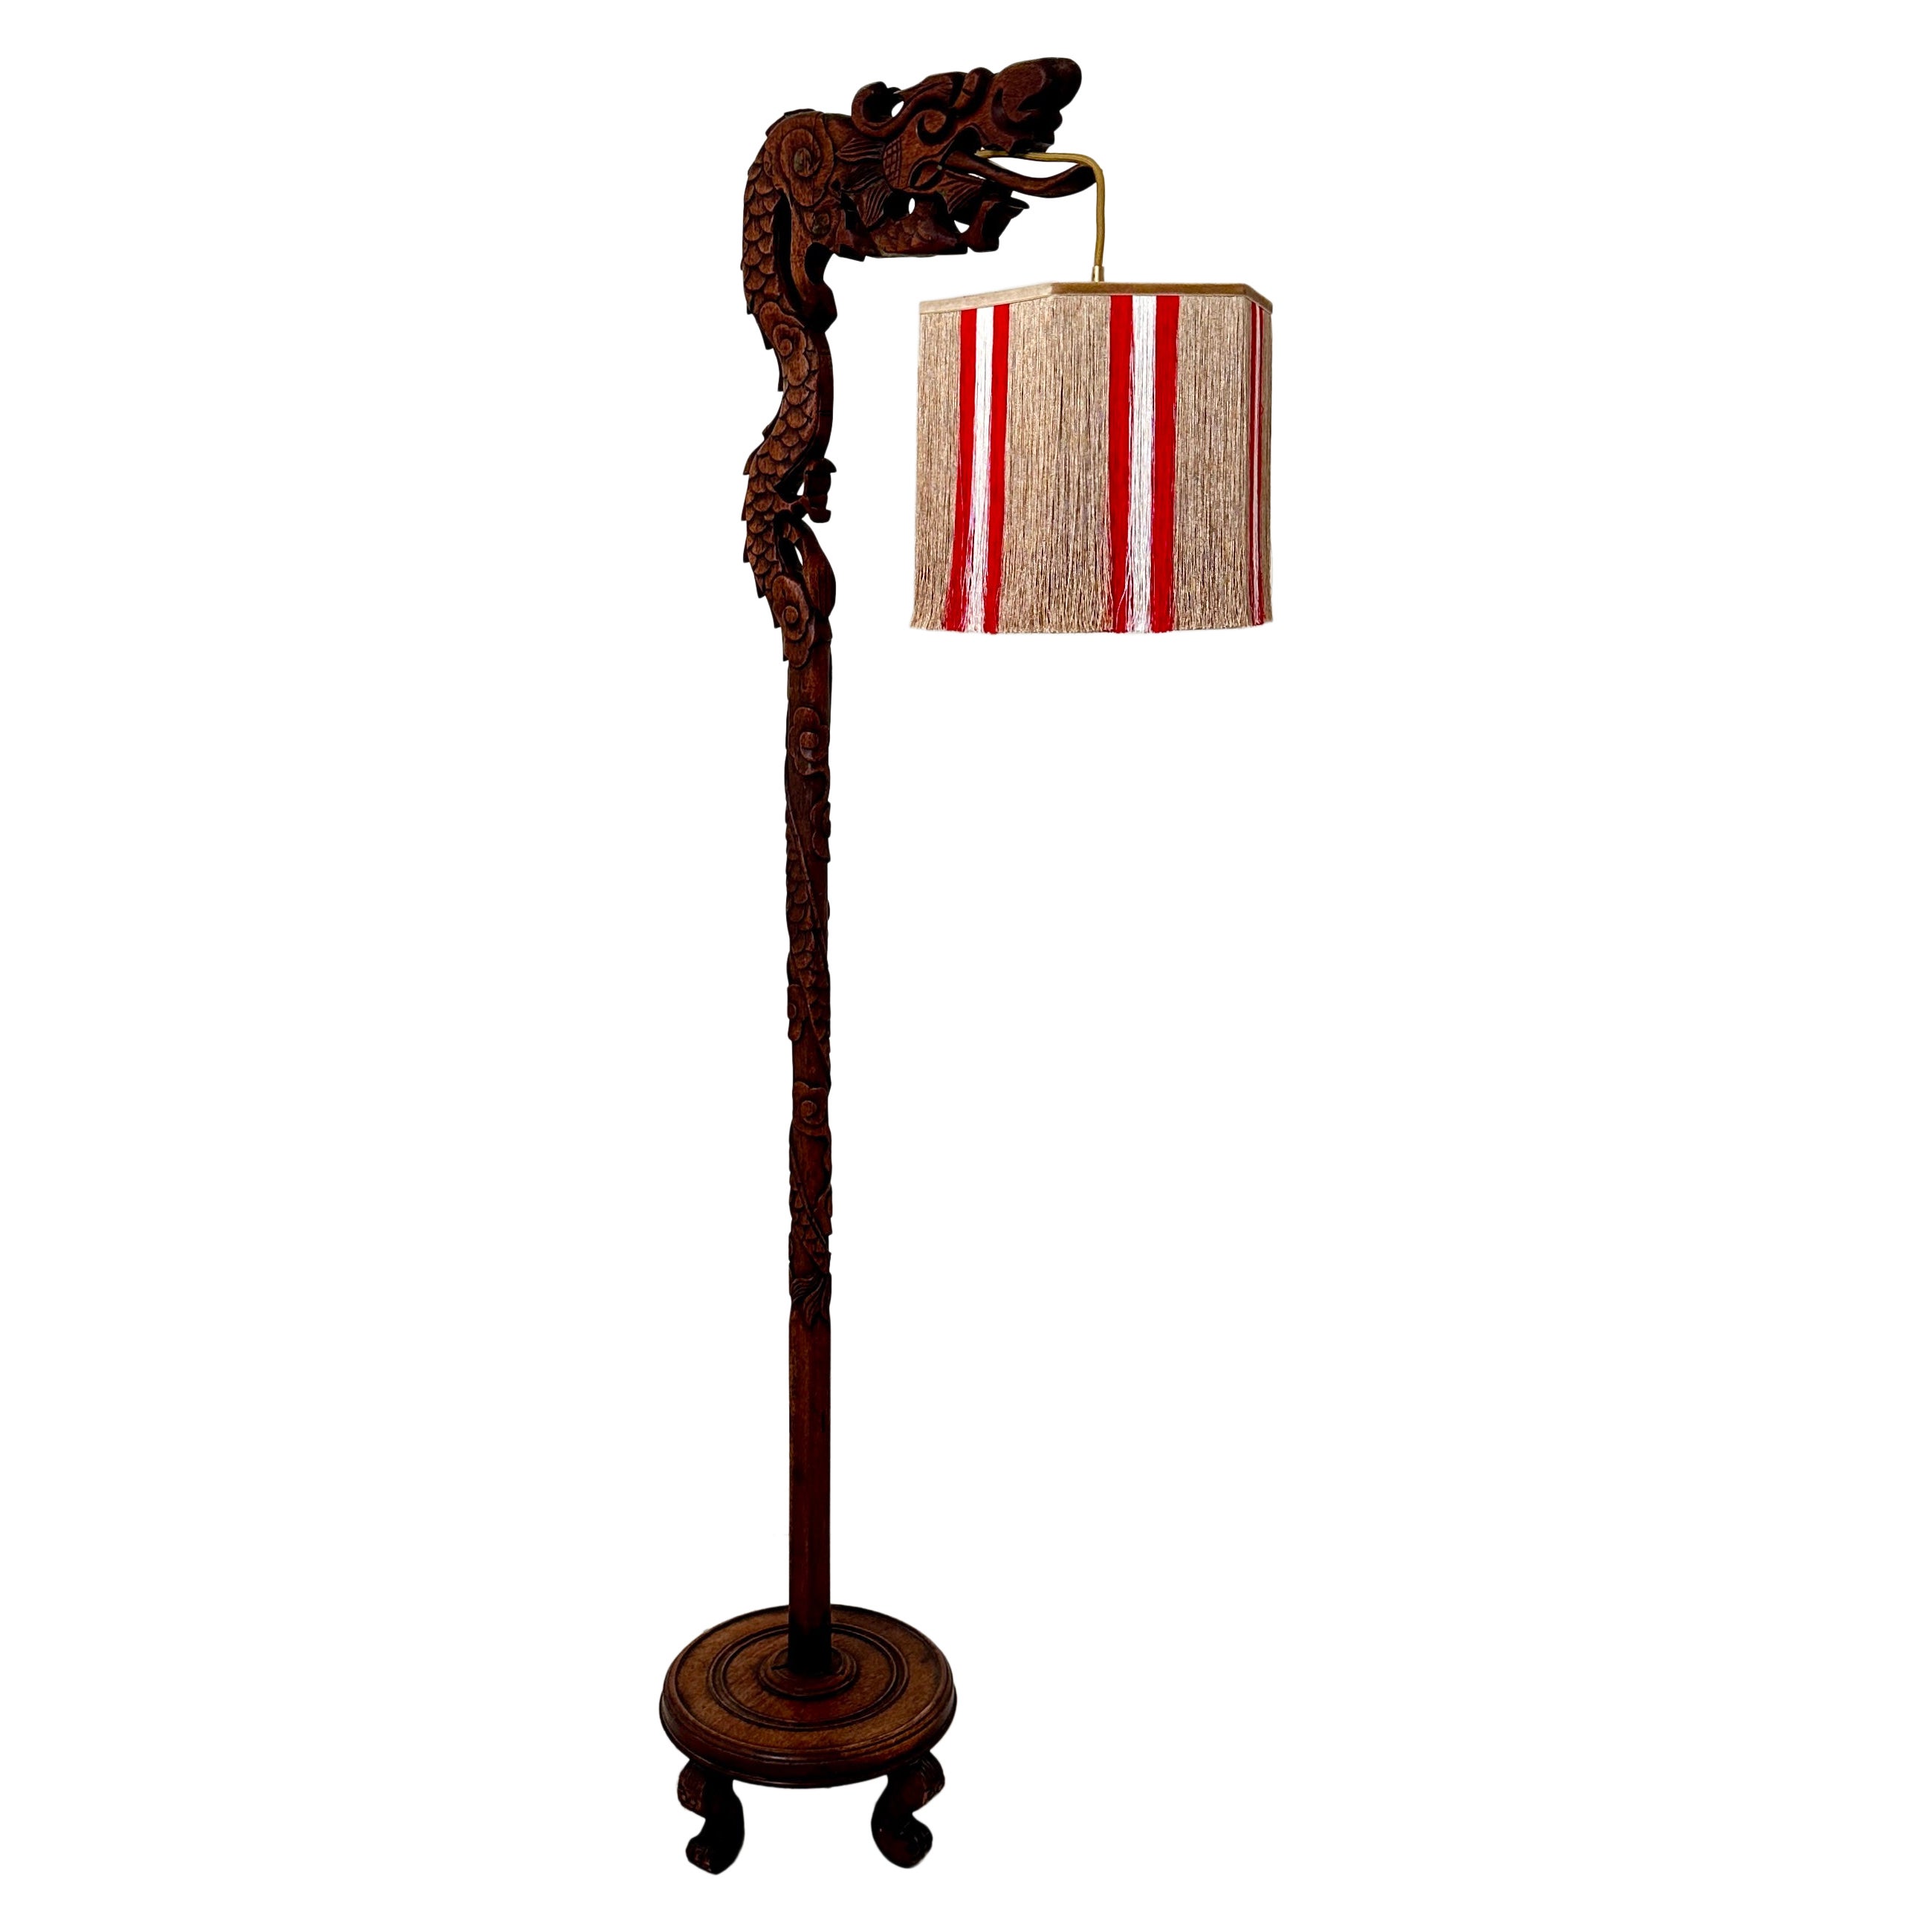 German Art Deco Floor Lamp in the Shape of a Dragon, carved with lampshade, 1920 For Sale